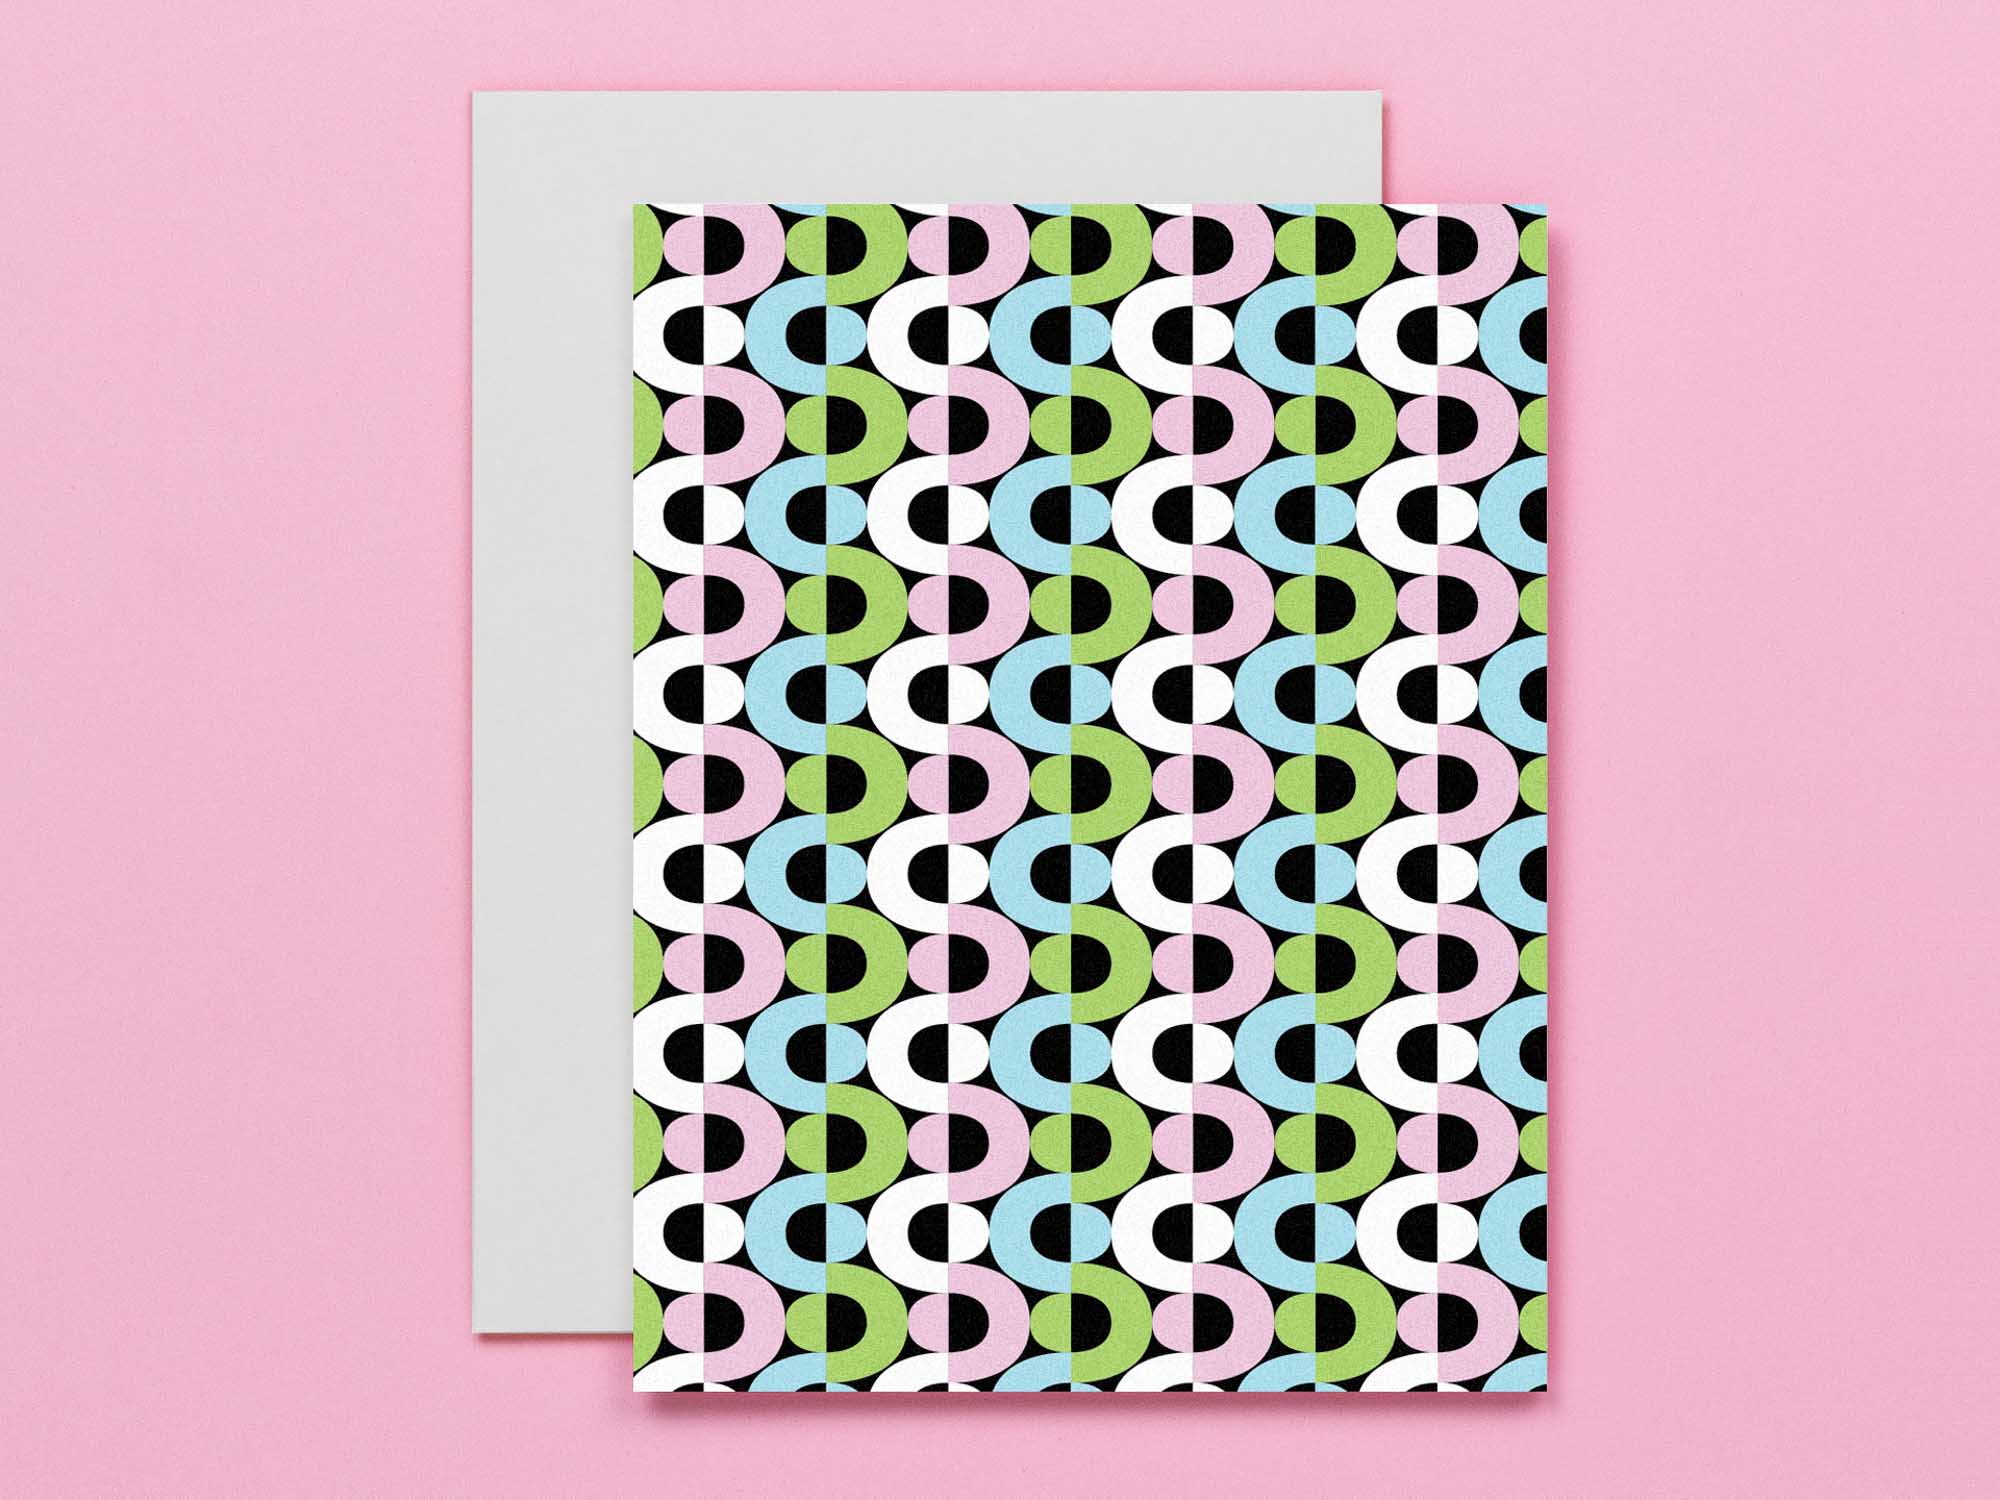 "Goldie" colorful, mod blank pattern cards, all occasions greeting card. Made in USA by @mydarlin_bk